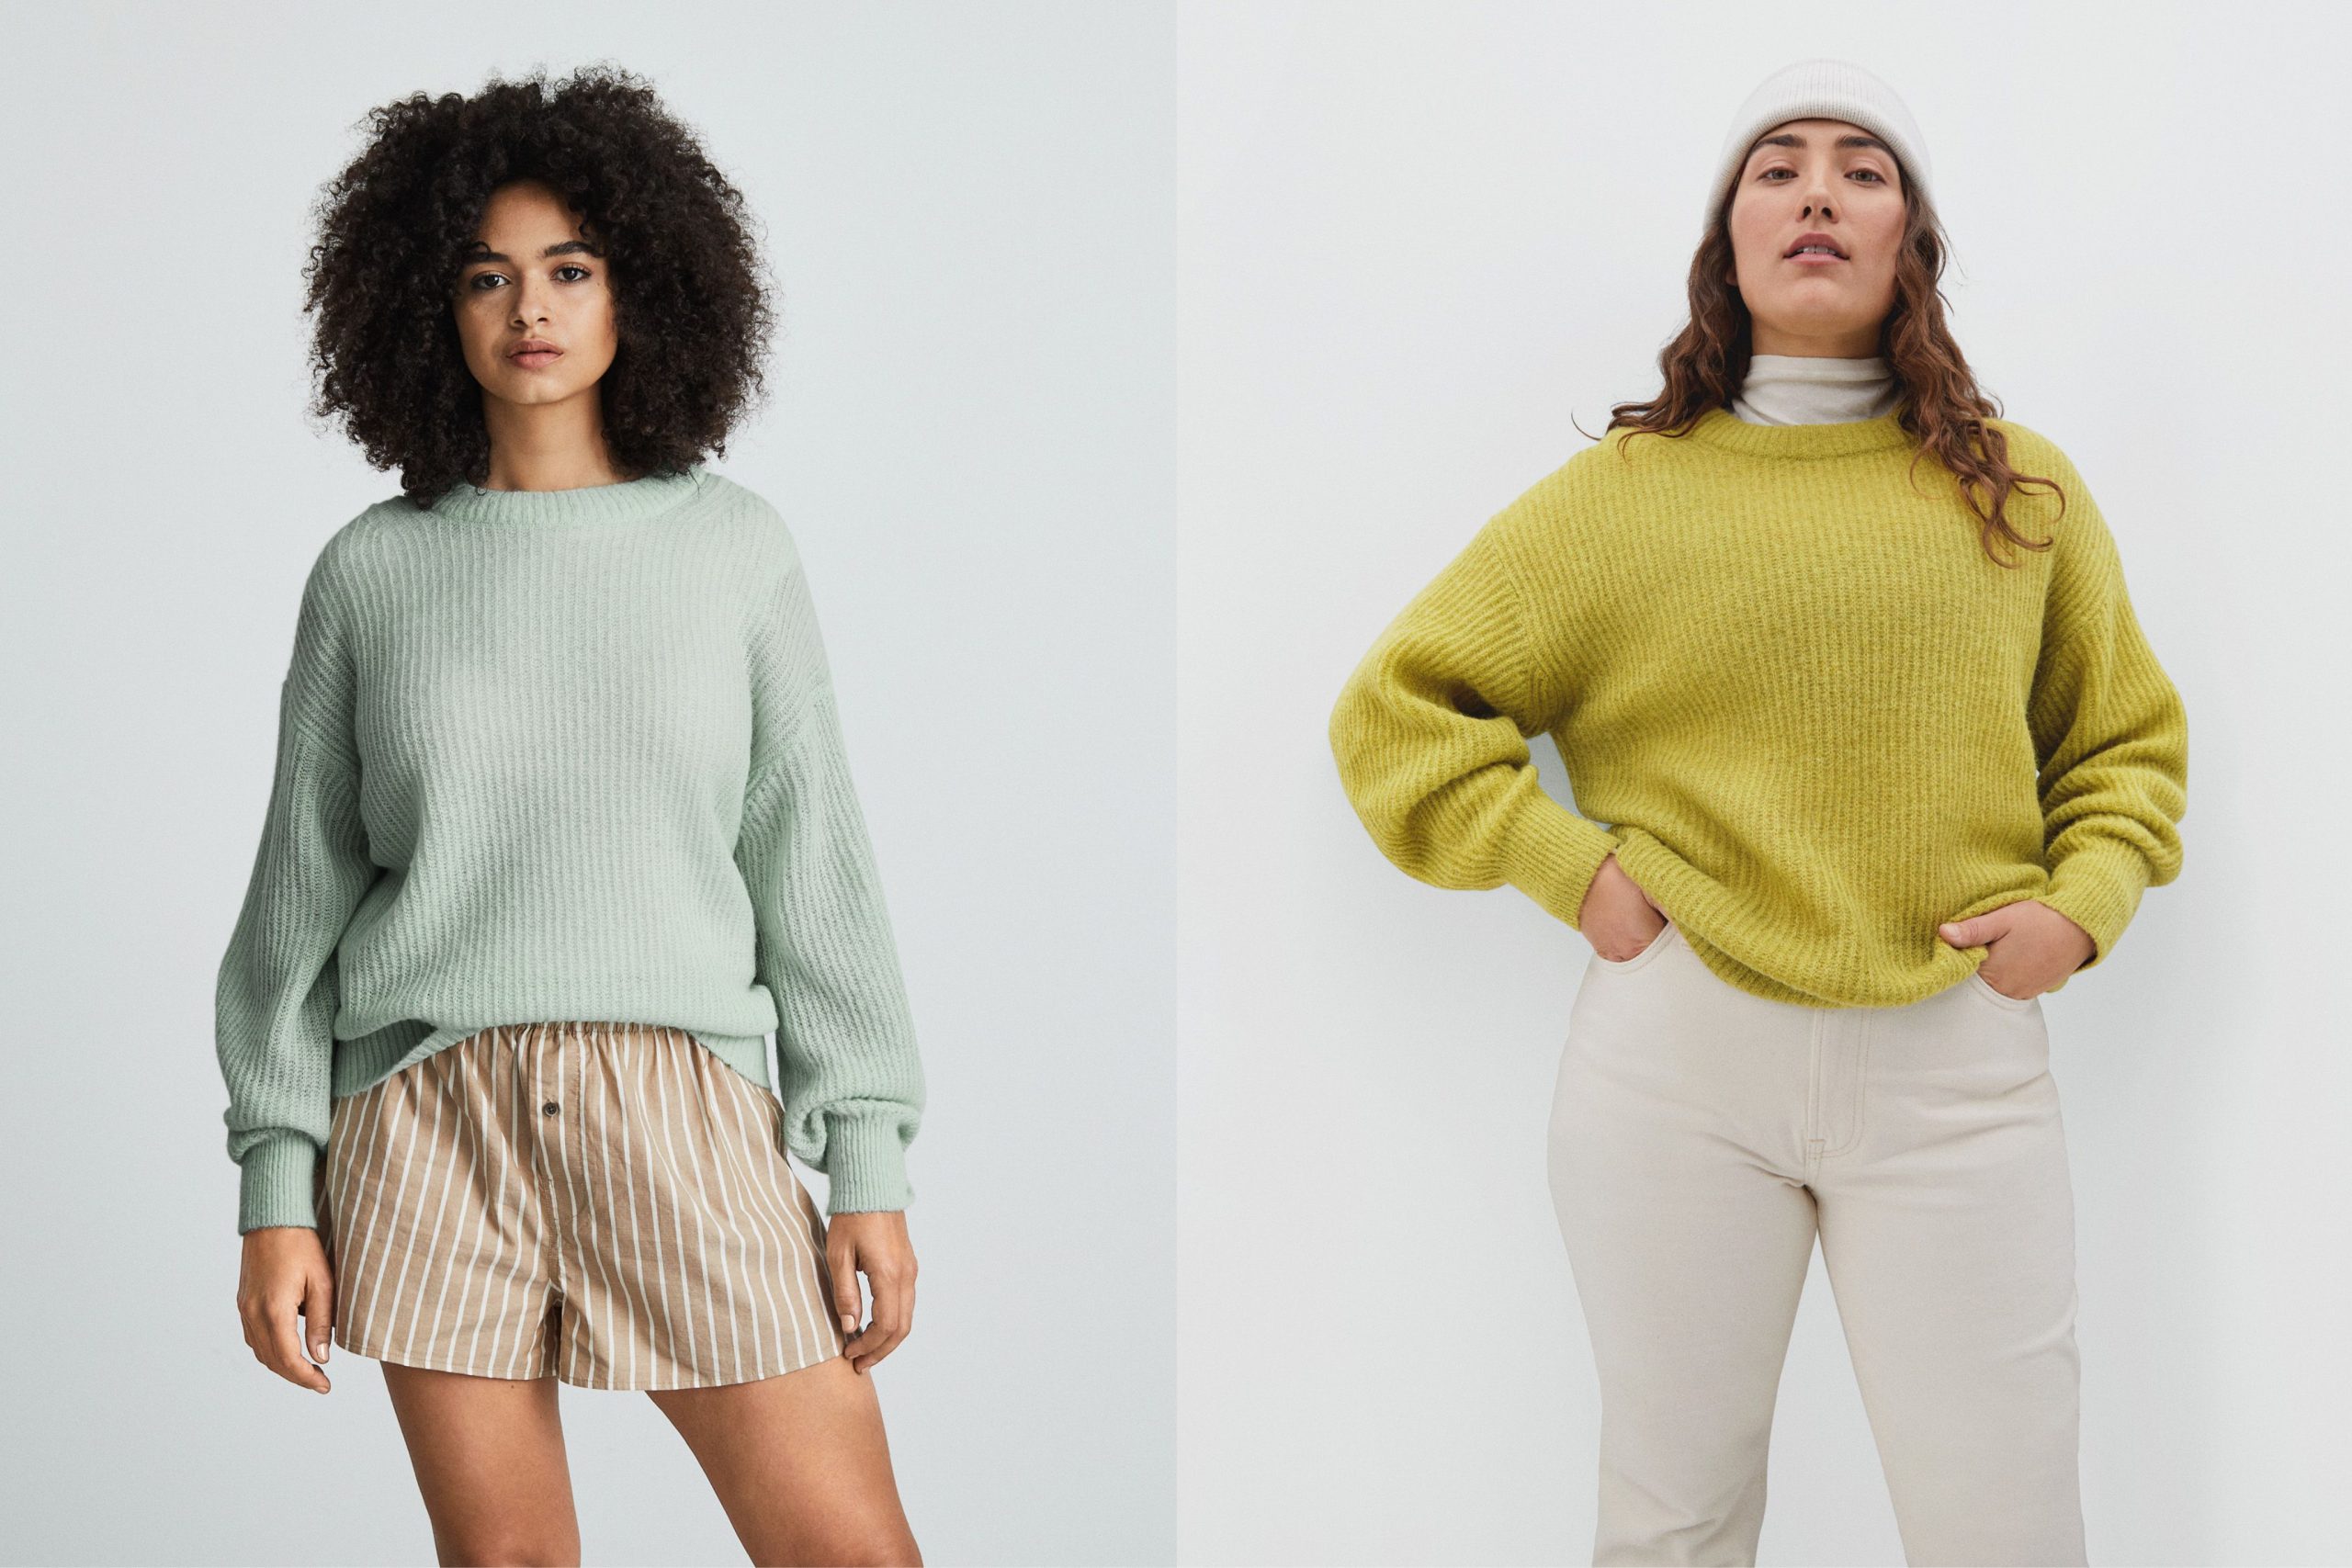 How to Get Cozy this Winter in Everlane’s Knits